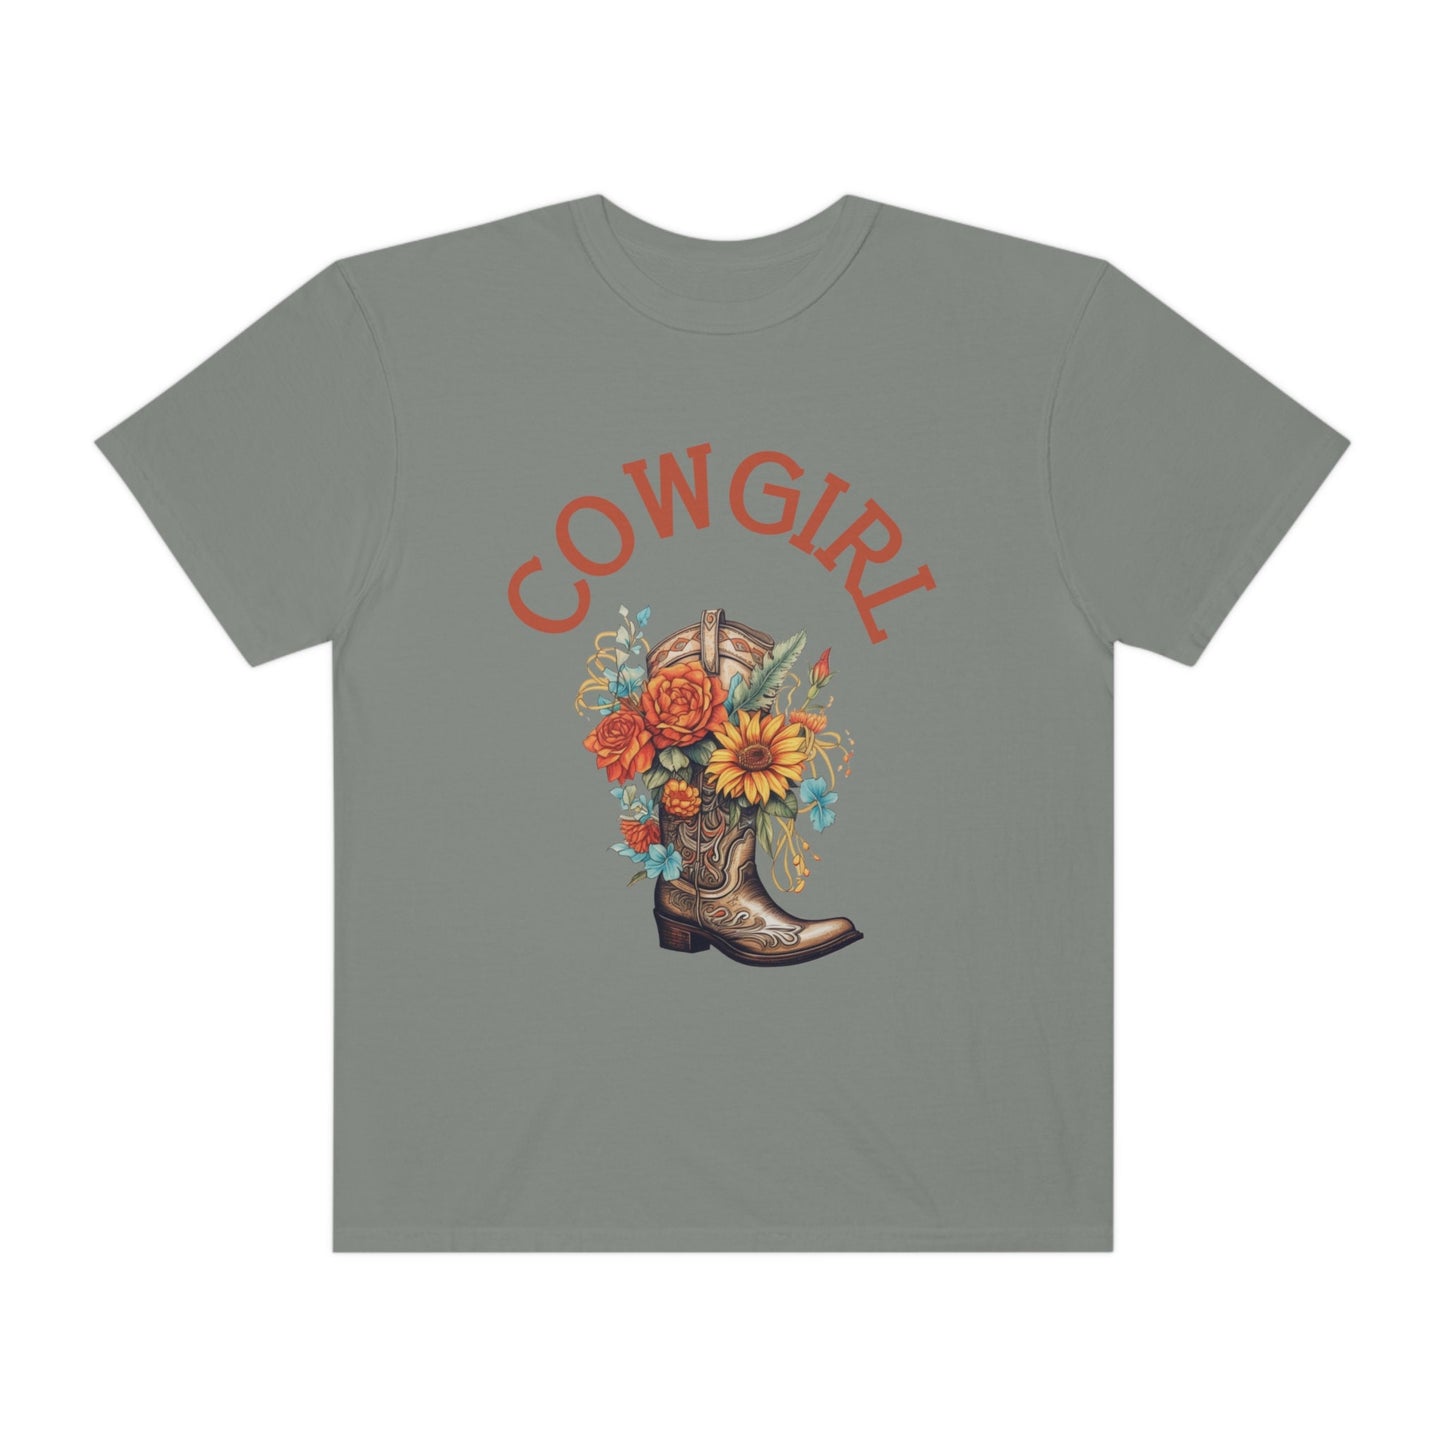 Cowgirl Boots Shirt, Country Concert Tee, Western Graphic Tee for Women, Oversized Graphic Tee, Cute Country Shirts, Cowgirl Shirt, Western